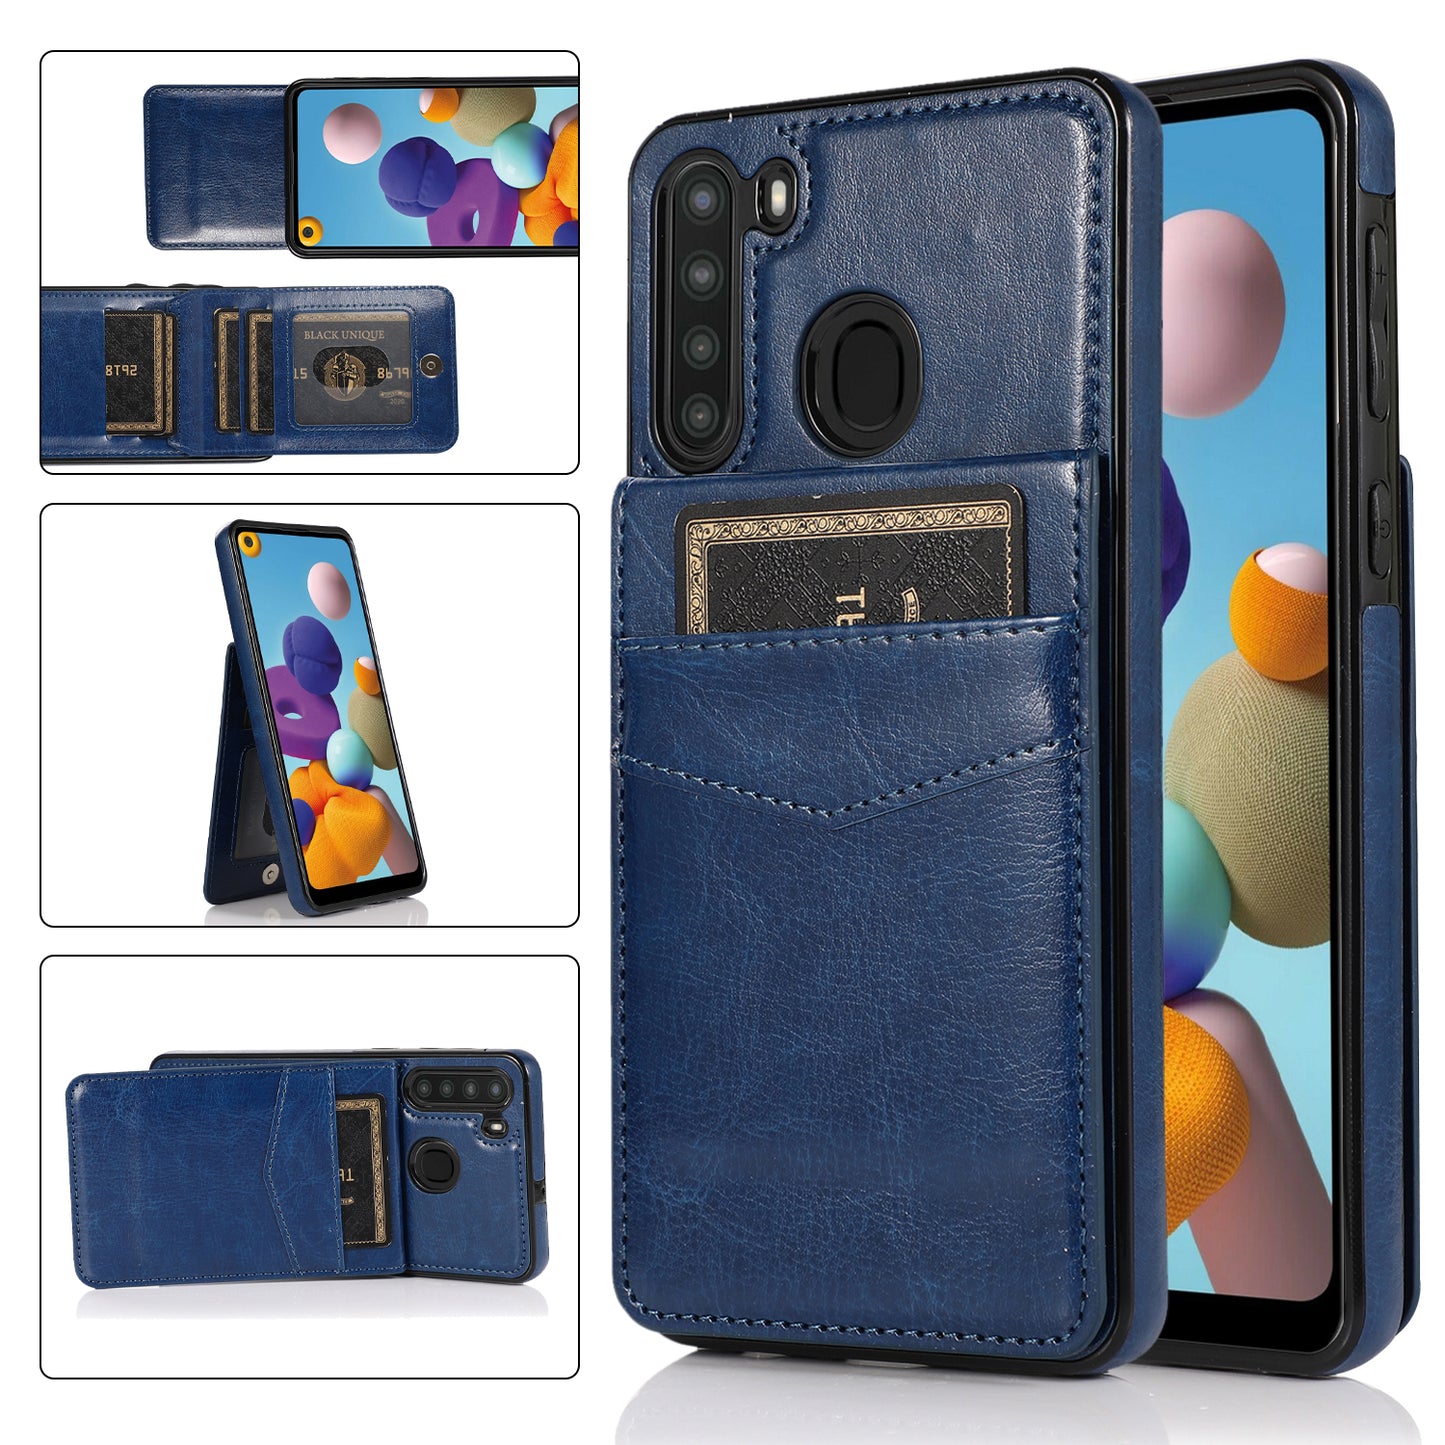 Samsung Galaxy A21 Leather Cover Vertical Horiznatal Kickstand with Card Slots